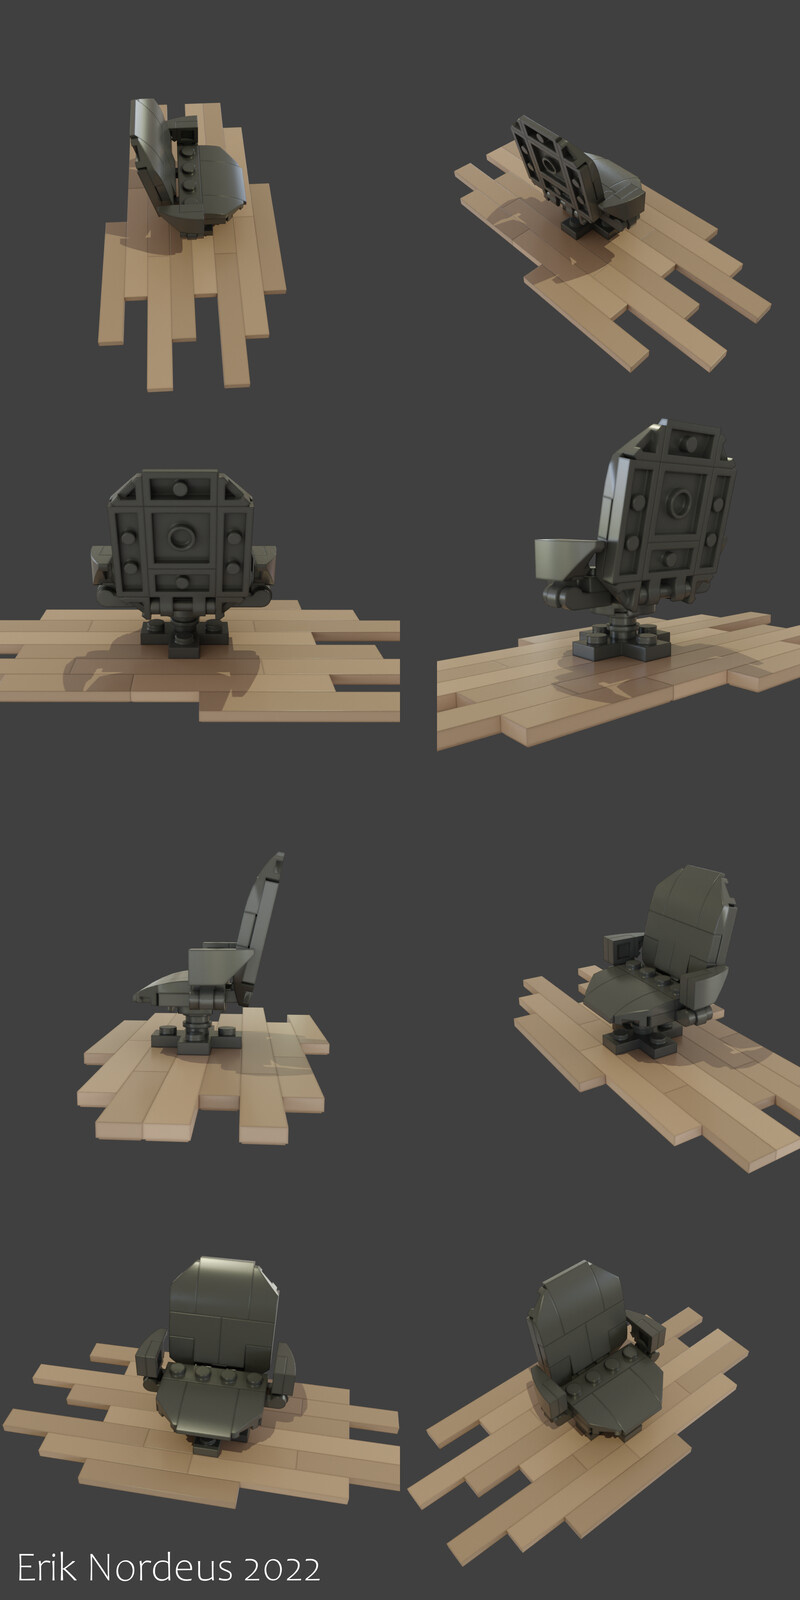 Here you can see the LEGO office desk leather chair from different angles if you want to build it yourself